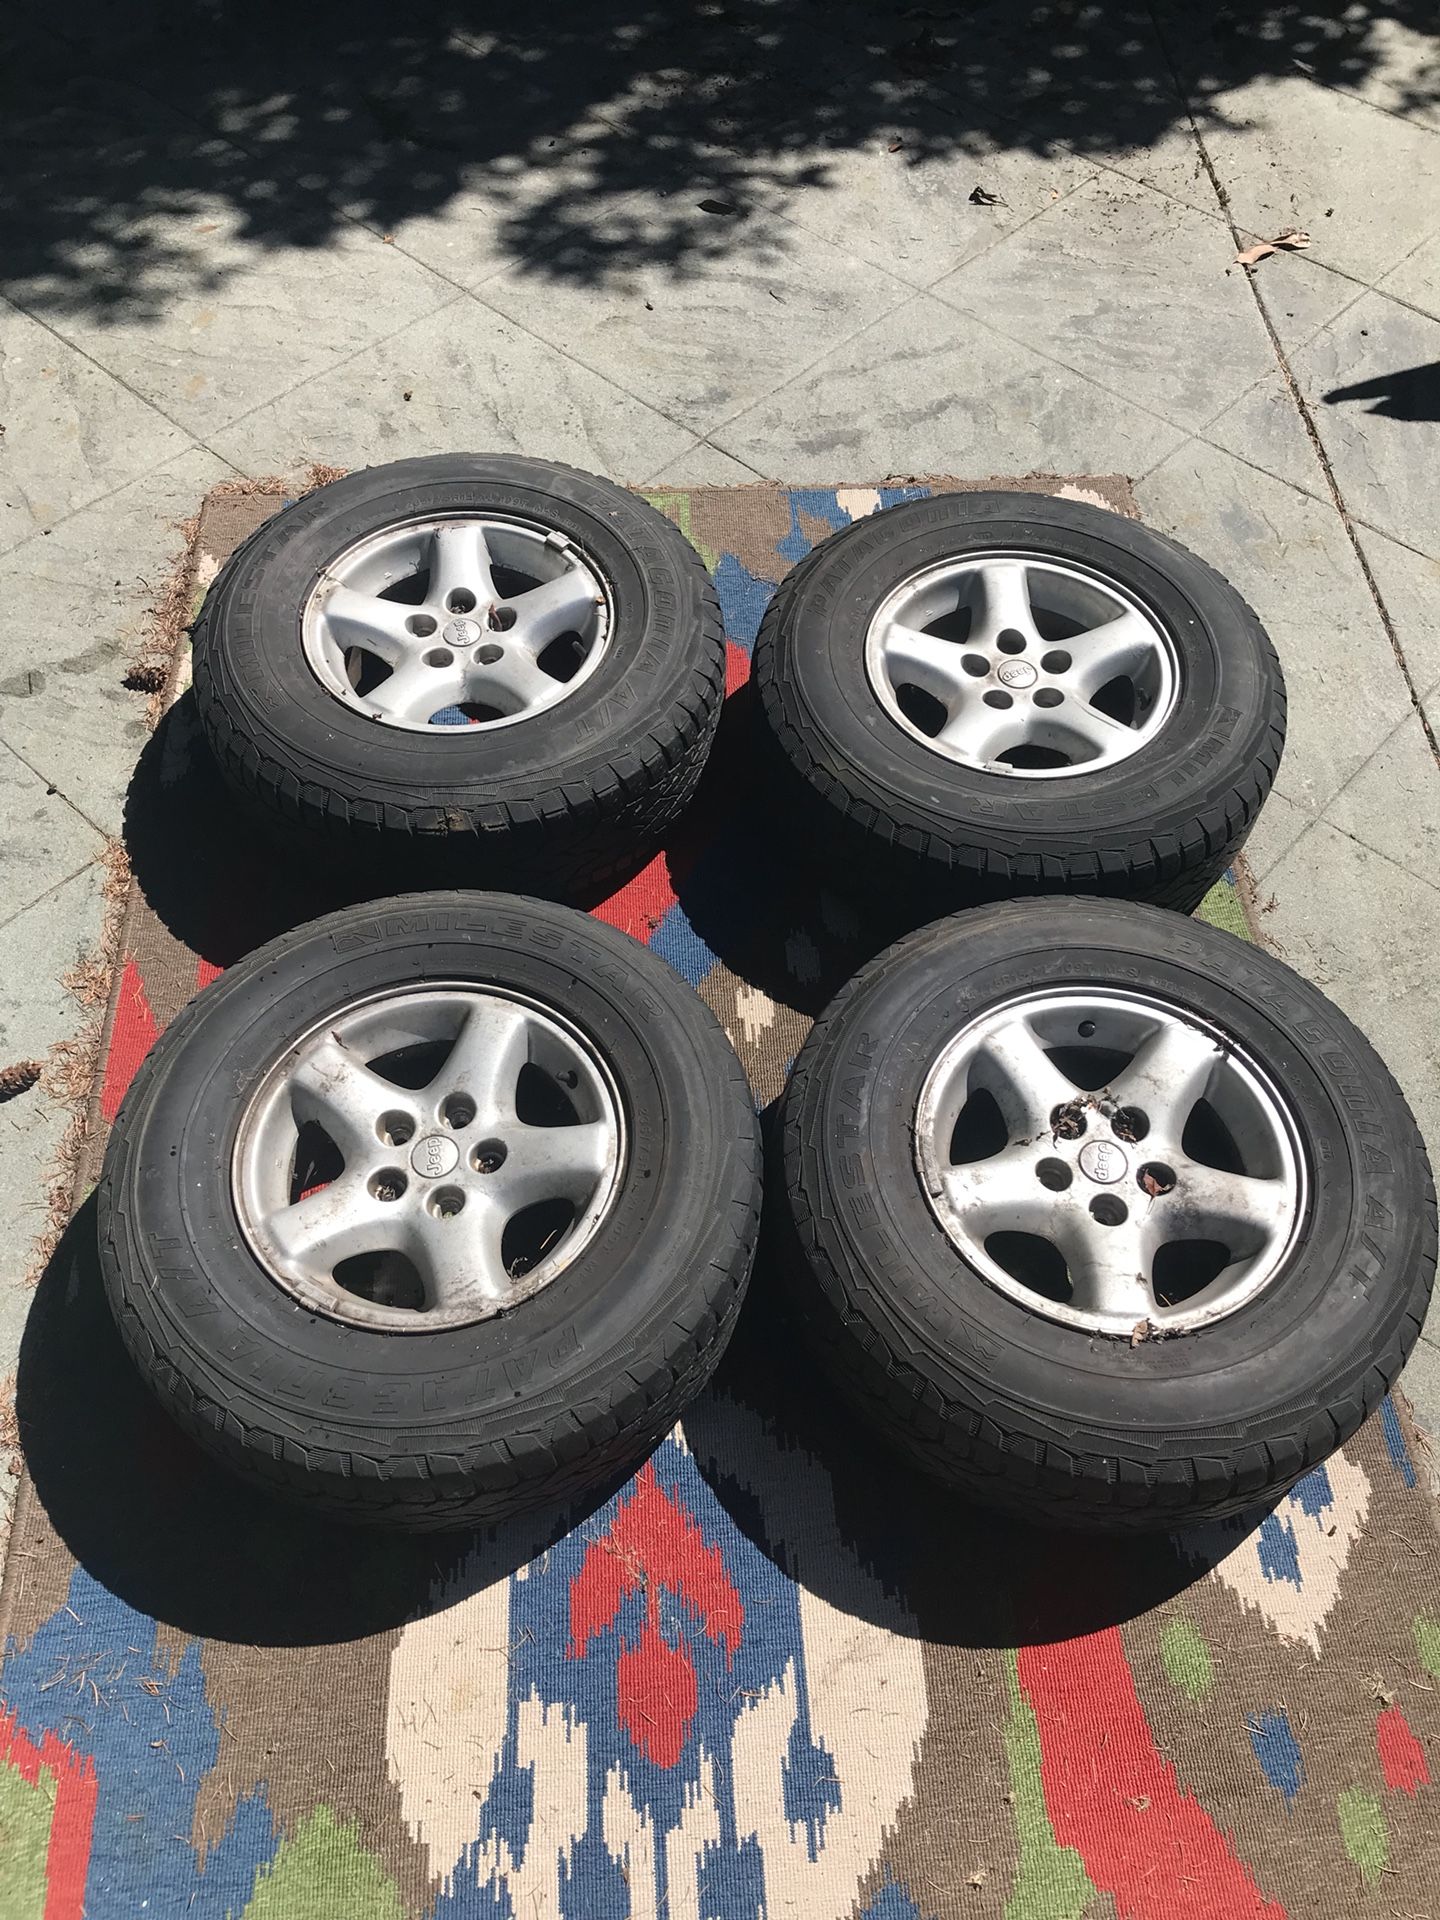 Jeep wheels with good tires